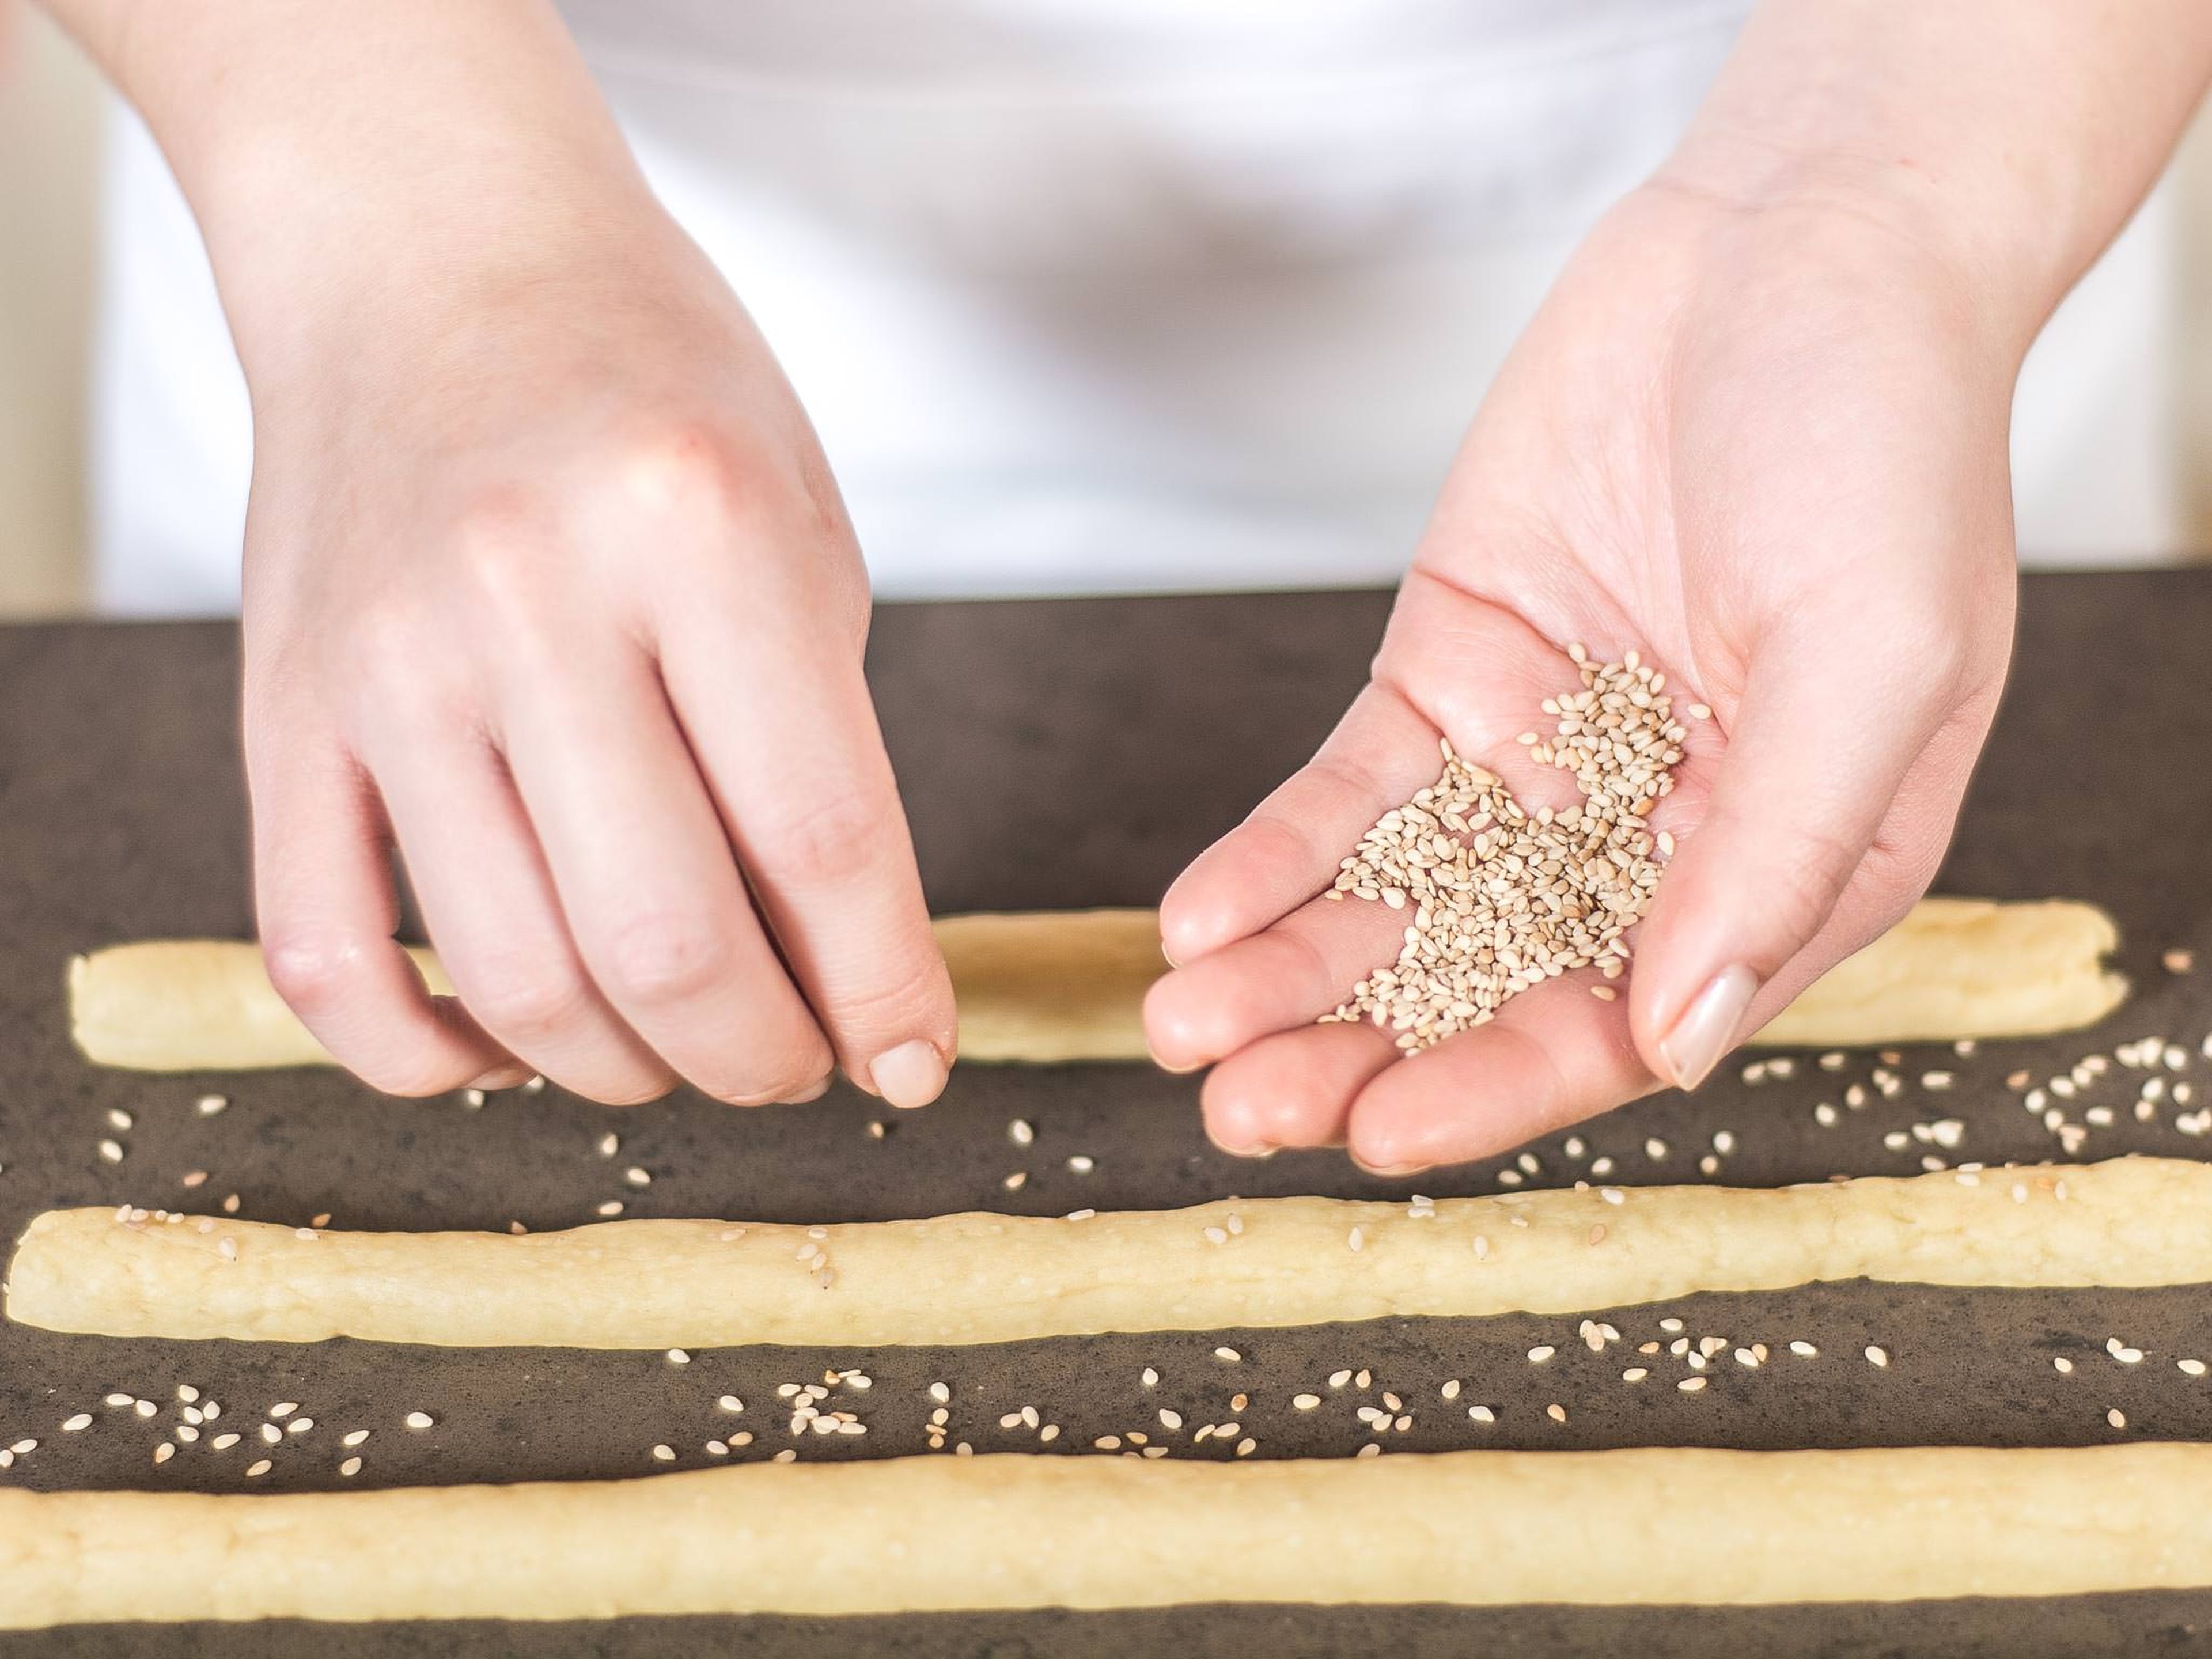 Sprinkle grissini with sesame seeds. Ideally, roll the grissini in the sesame seeds so they stick better. Place the sticks onto a lined baking tray, cover, and leave to rise in a warm place for 20 min.